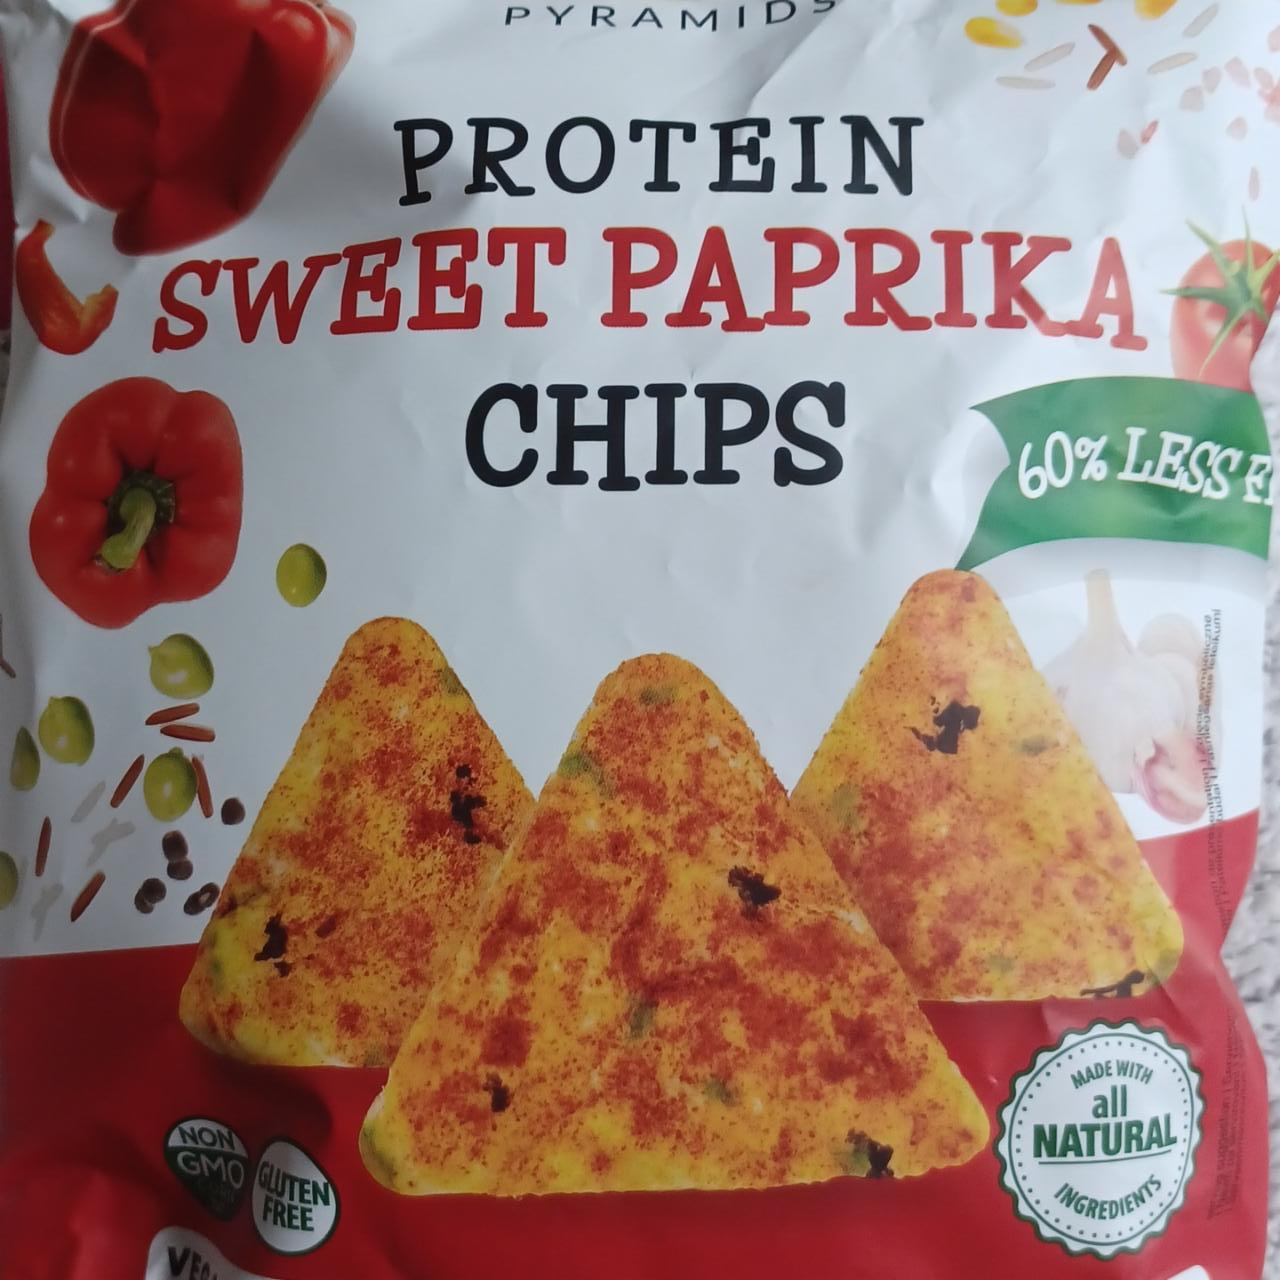 Fotografie - Pyramids Protein Sweet Paprika Chips 60% less fat Popcrop